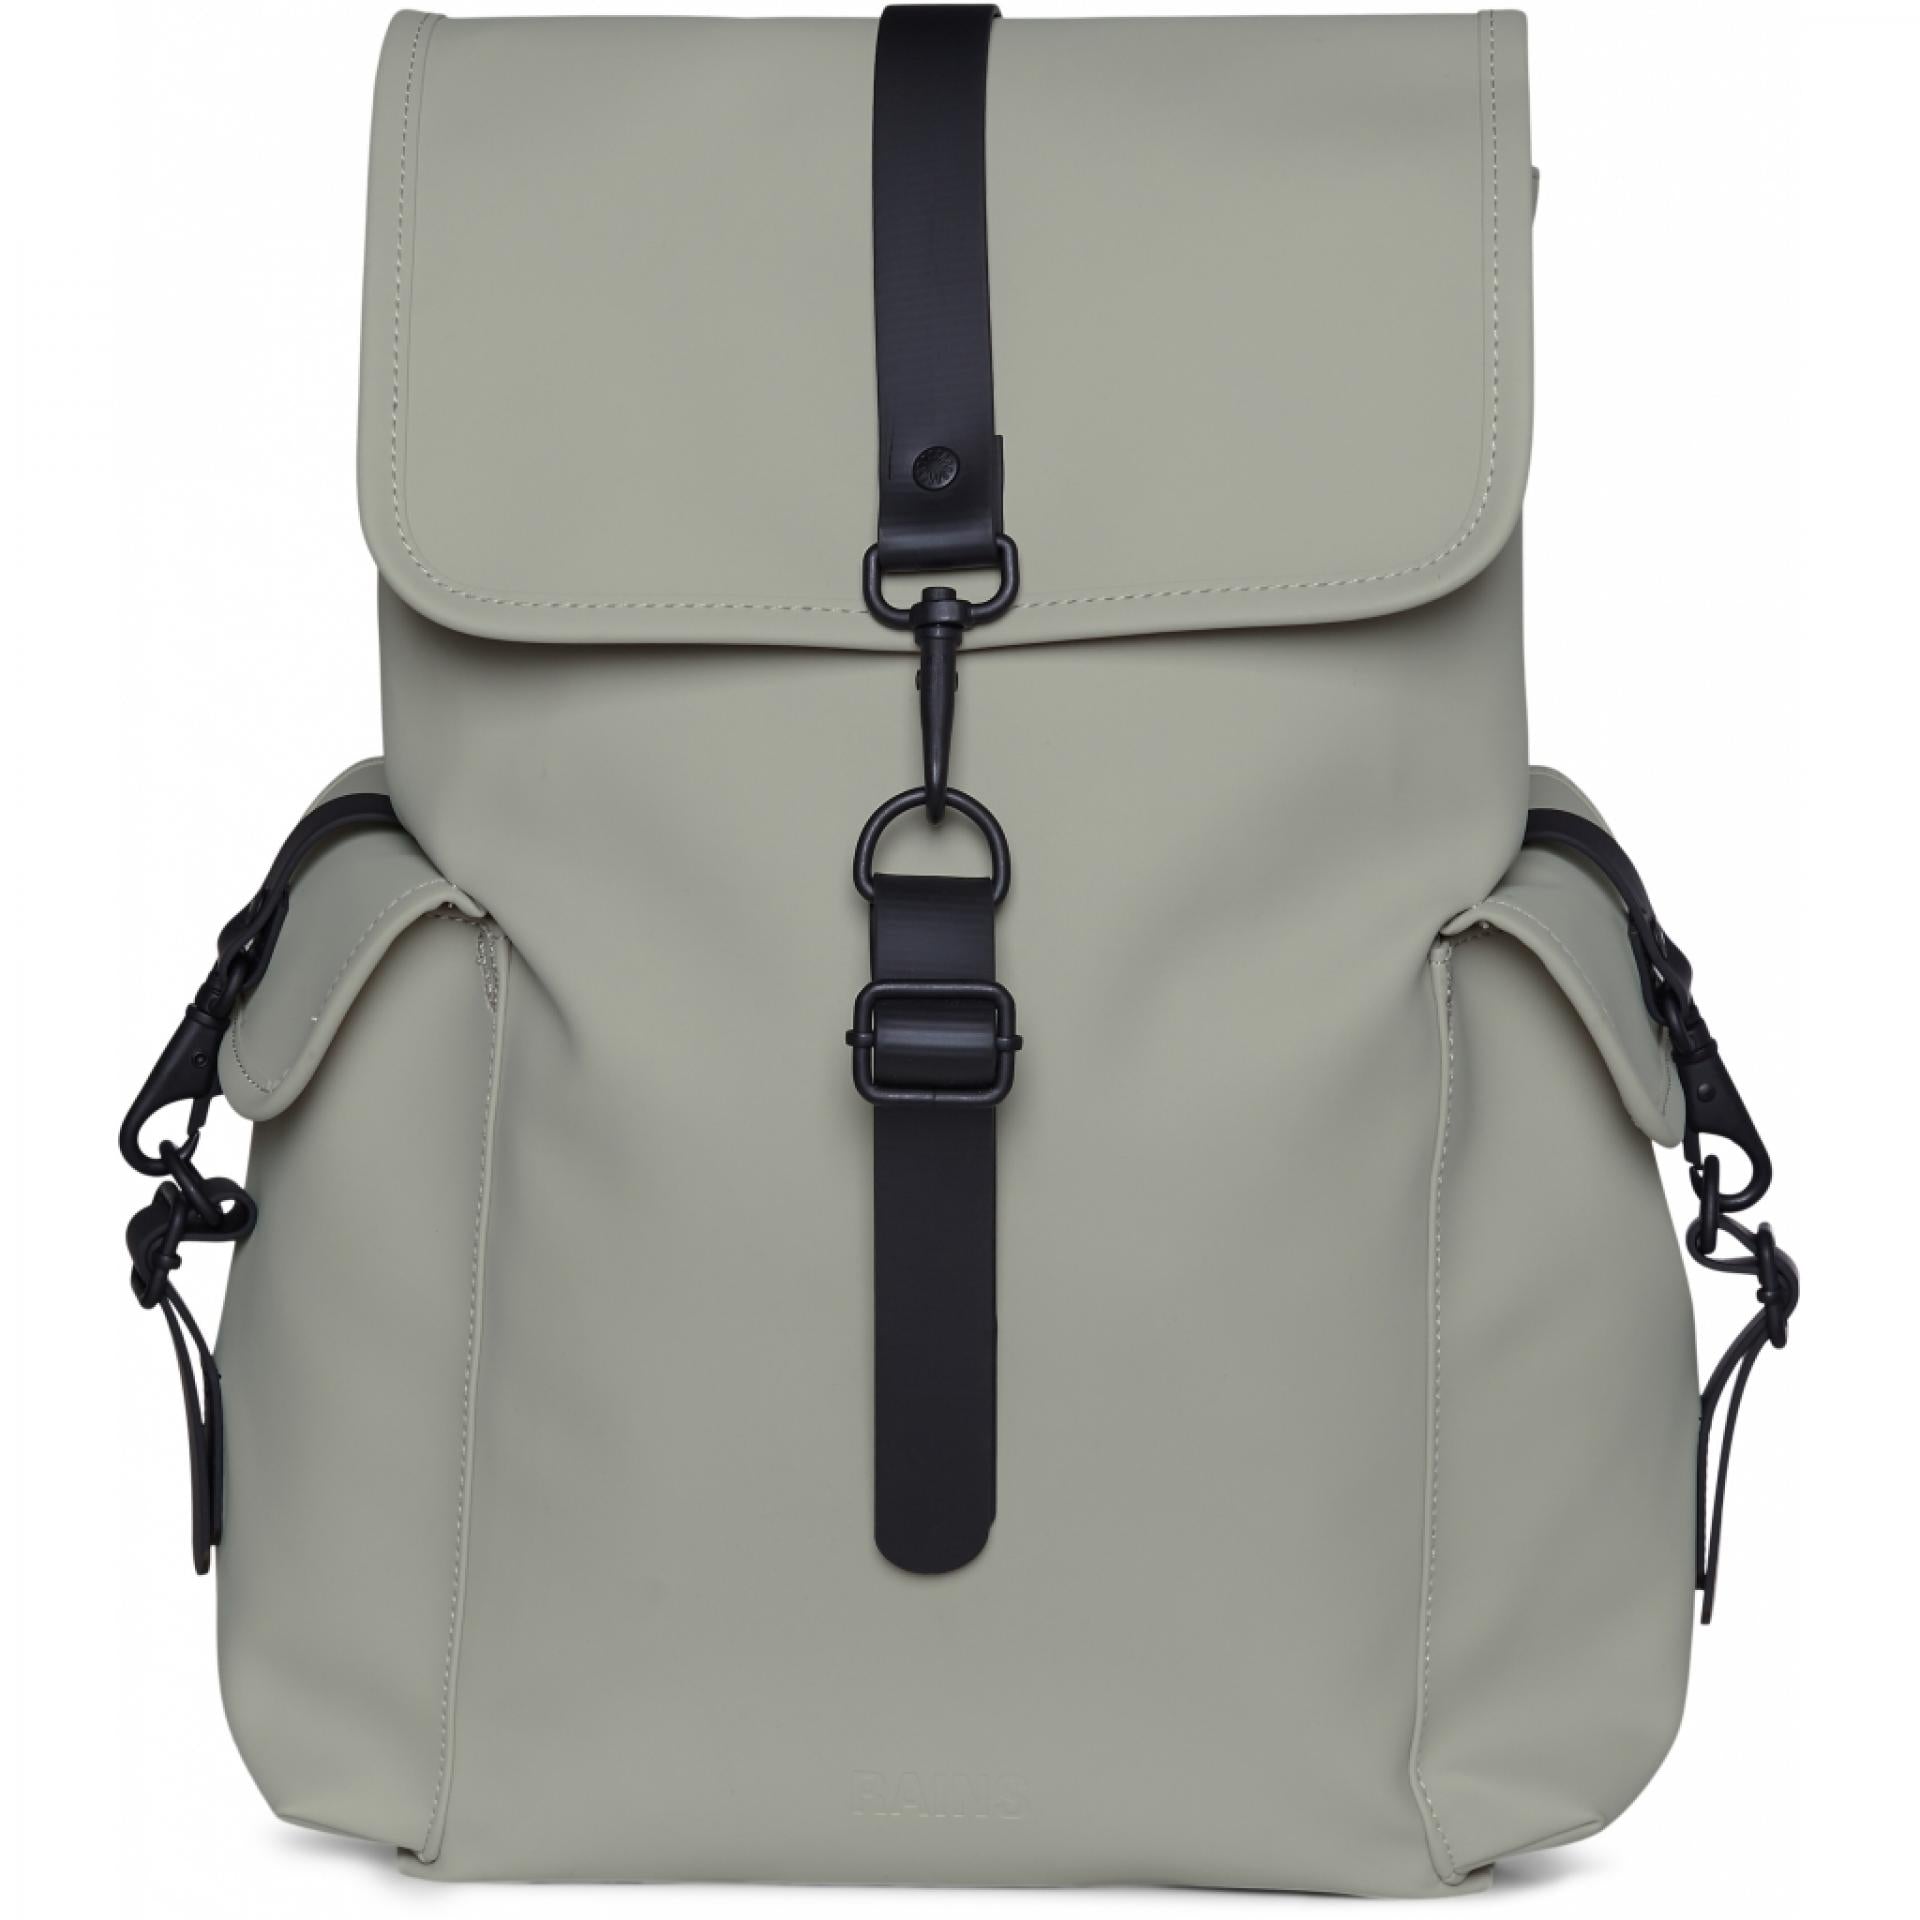 Rains Rucksack Large 80 Cement One Size